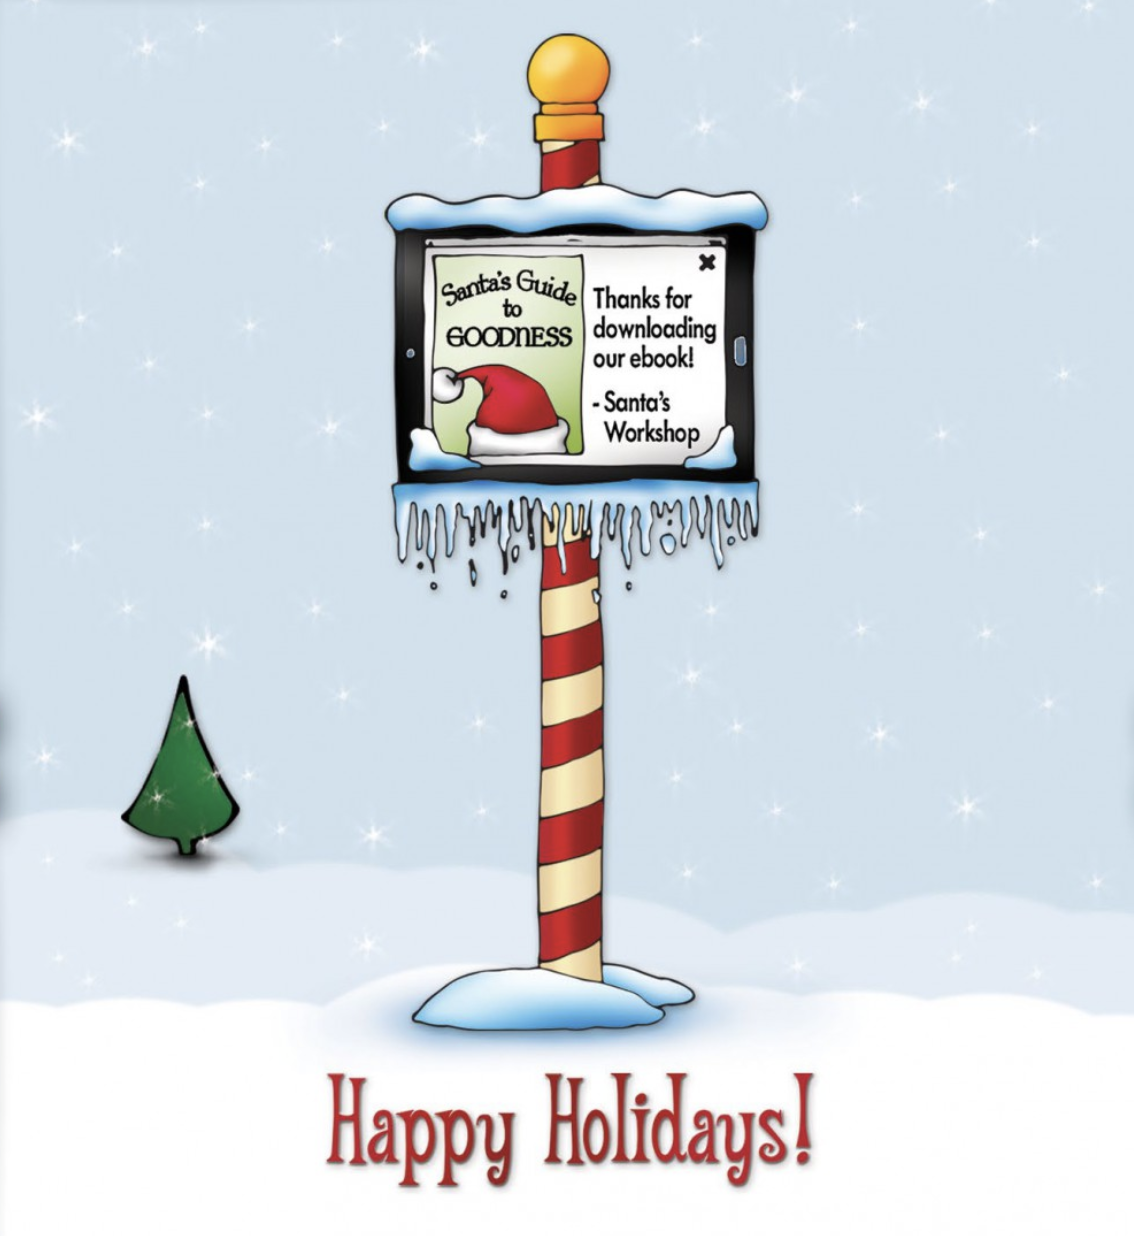 Spread the cheer! How to do holiday marketing the right way for B2B and professional services